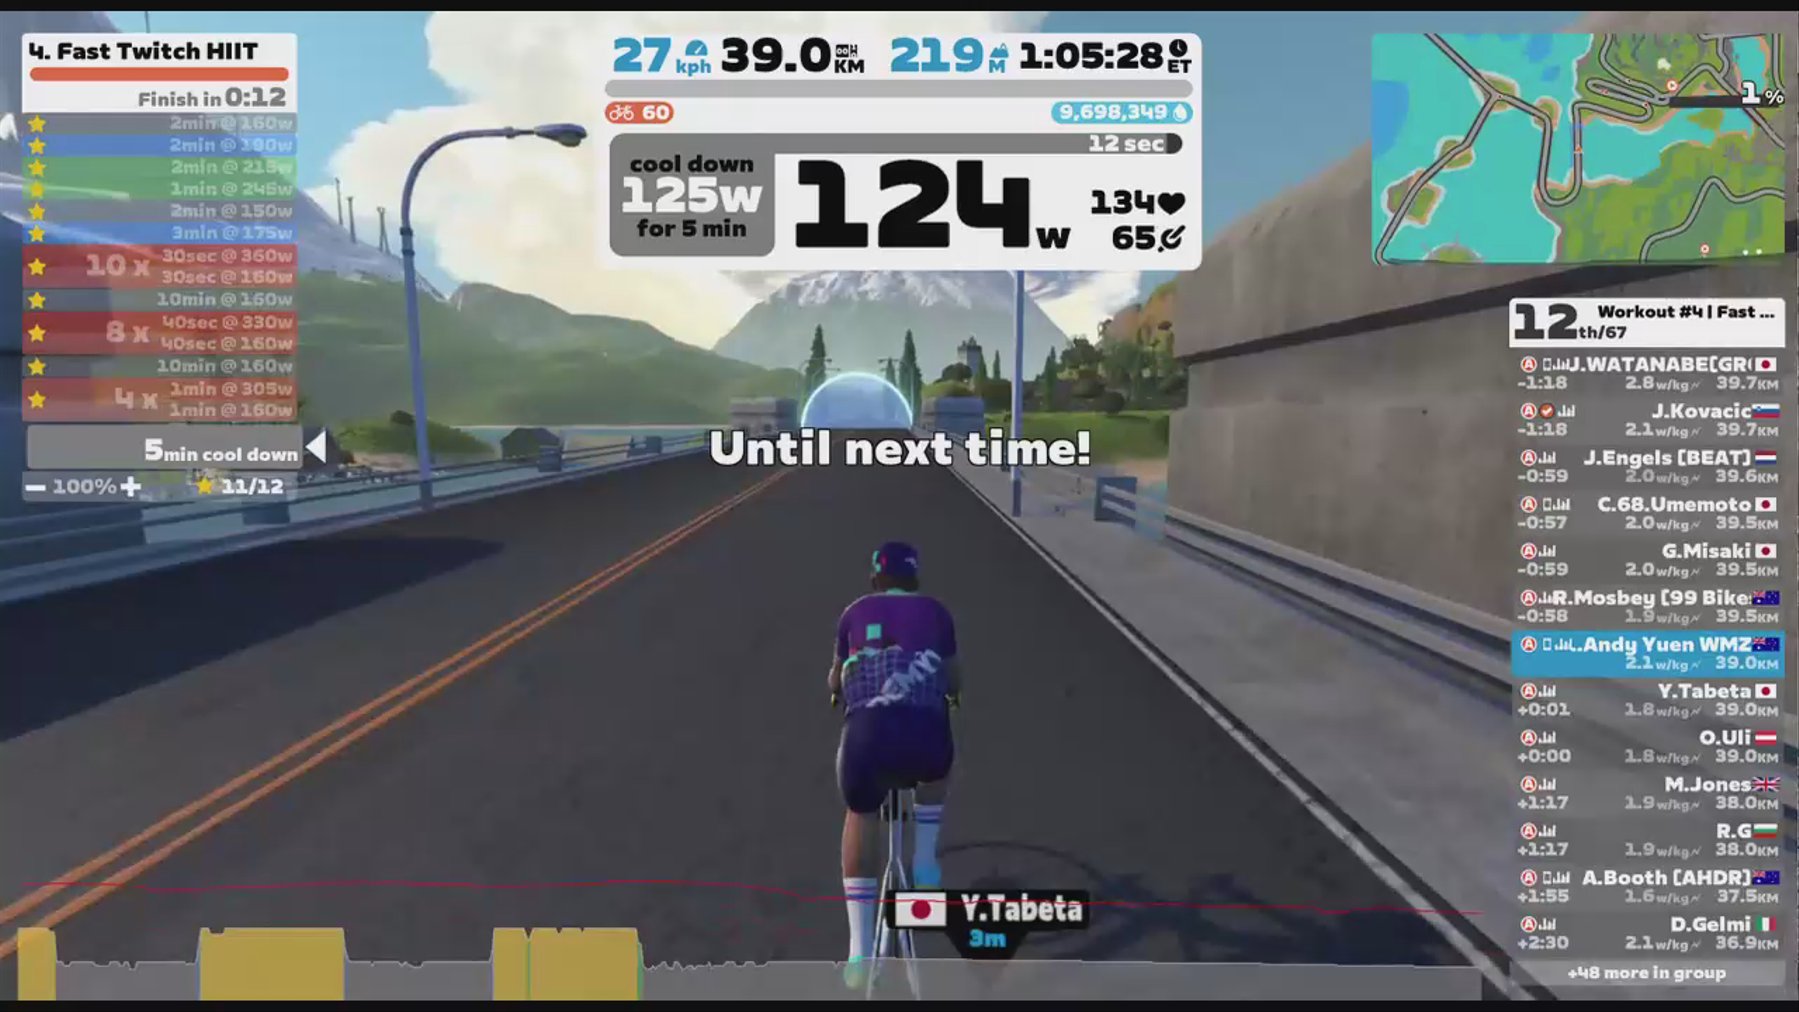 Zwift - Group Workout: Long | Fast Twitch HIIT | ZA 2023 on The Big Ring in Watopia